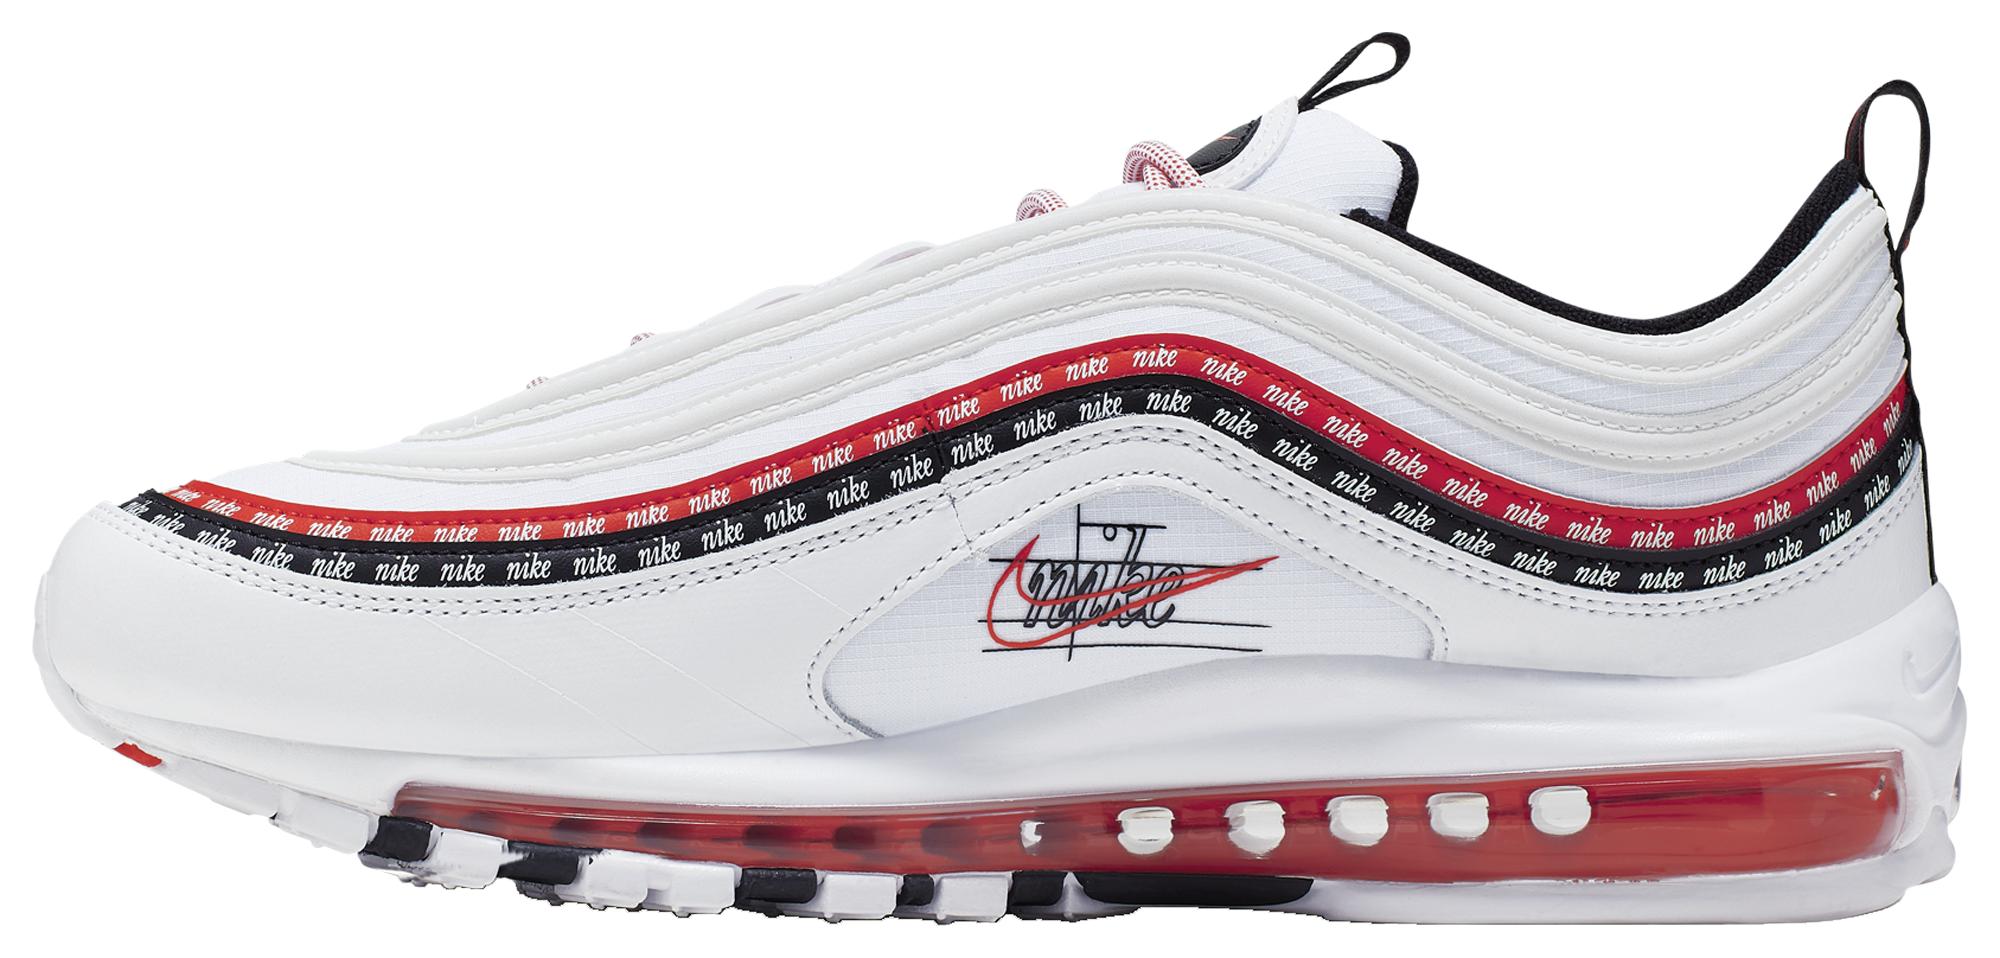 97s red and white